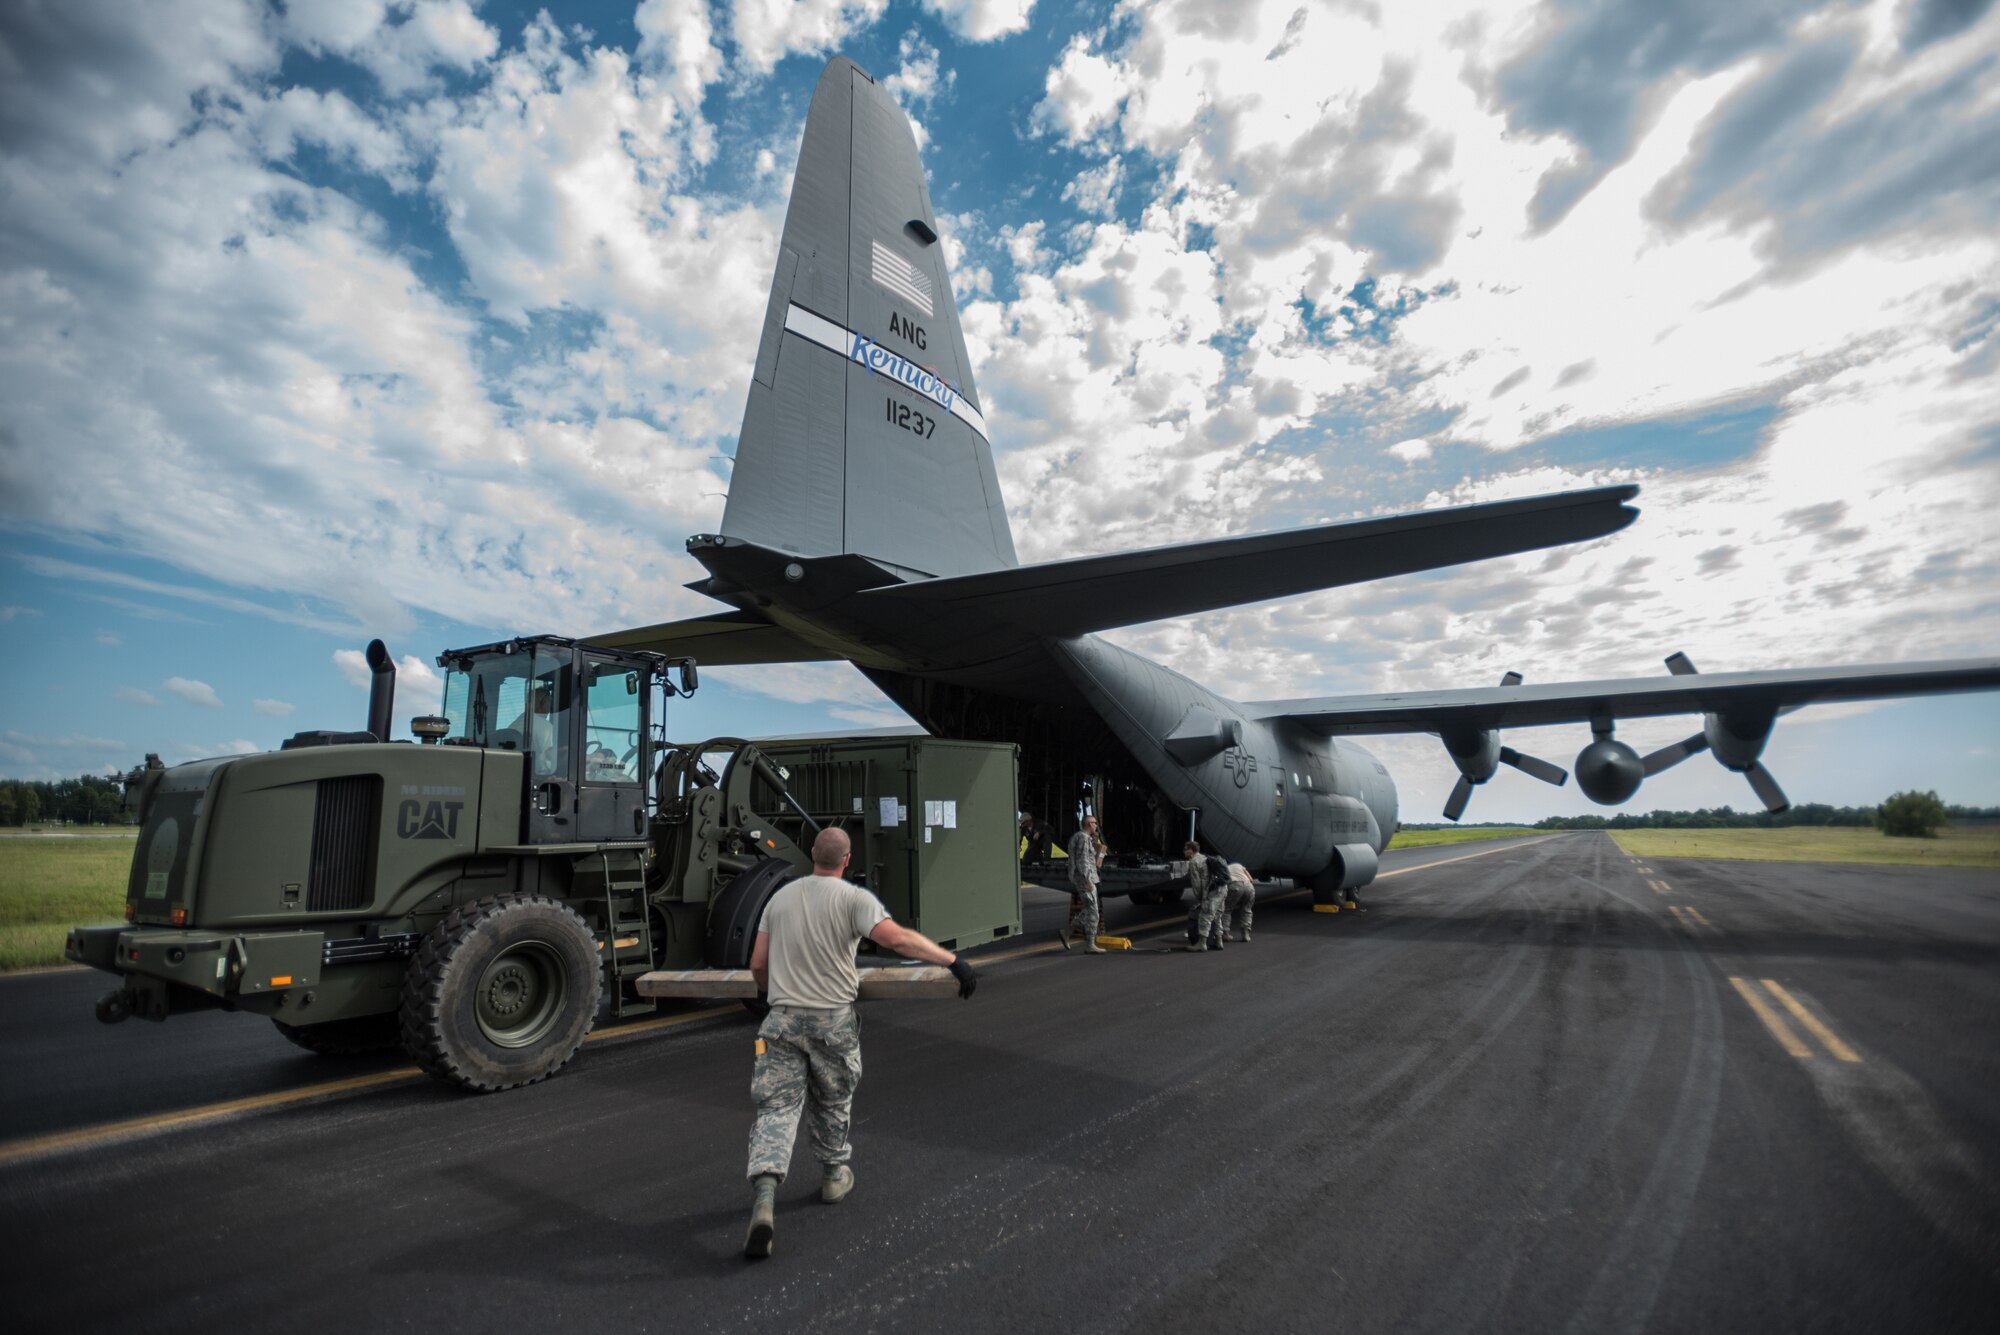 Members of the Kentucky Air National Guard’s 123rd Airlift Wing unload a container of medical equipment from a C-130 Hercules at Barkley Regional Airport in Paducah, Ky., July 13, 2016, in preparation for Bluegrass Medical Innovative Readiness Training. The program will offer medical and dental care at no cost to residents in three Western Kentucky locations from July 18 to 27. (U.S. Air National Guard photo by Master Sgt. Phil Speck)